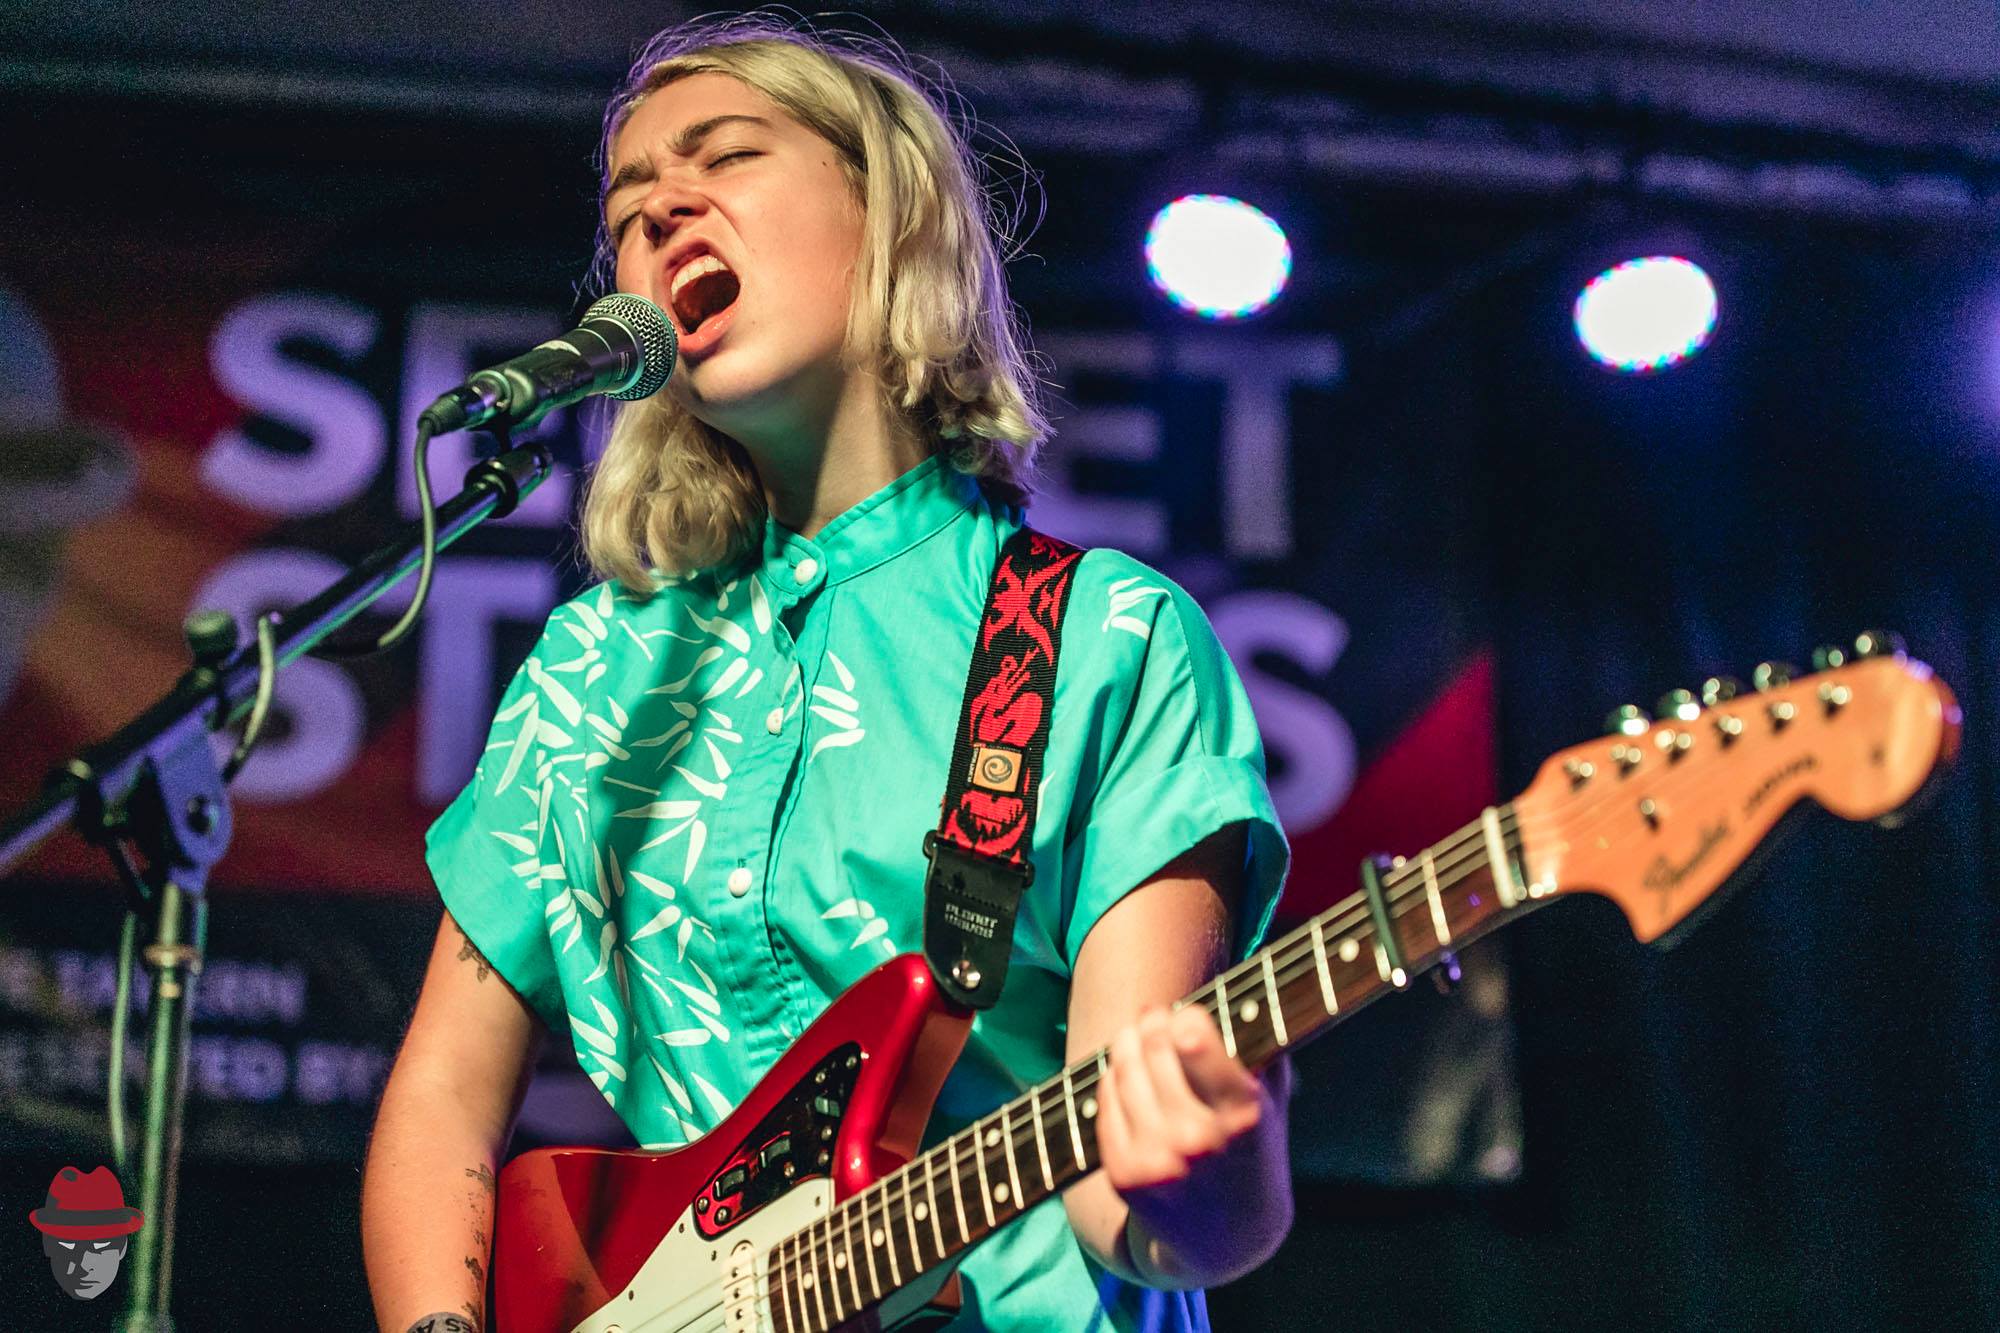 Snail Mail performed at Secret Stages in 2017, before the release of her EP "Lush." Photo by Secret Playground Photography for Secret Stages